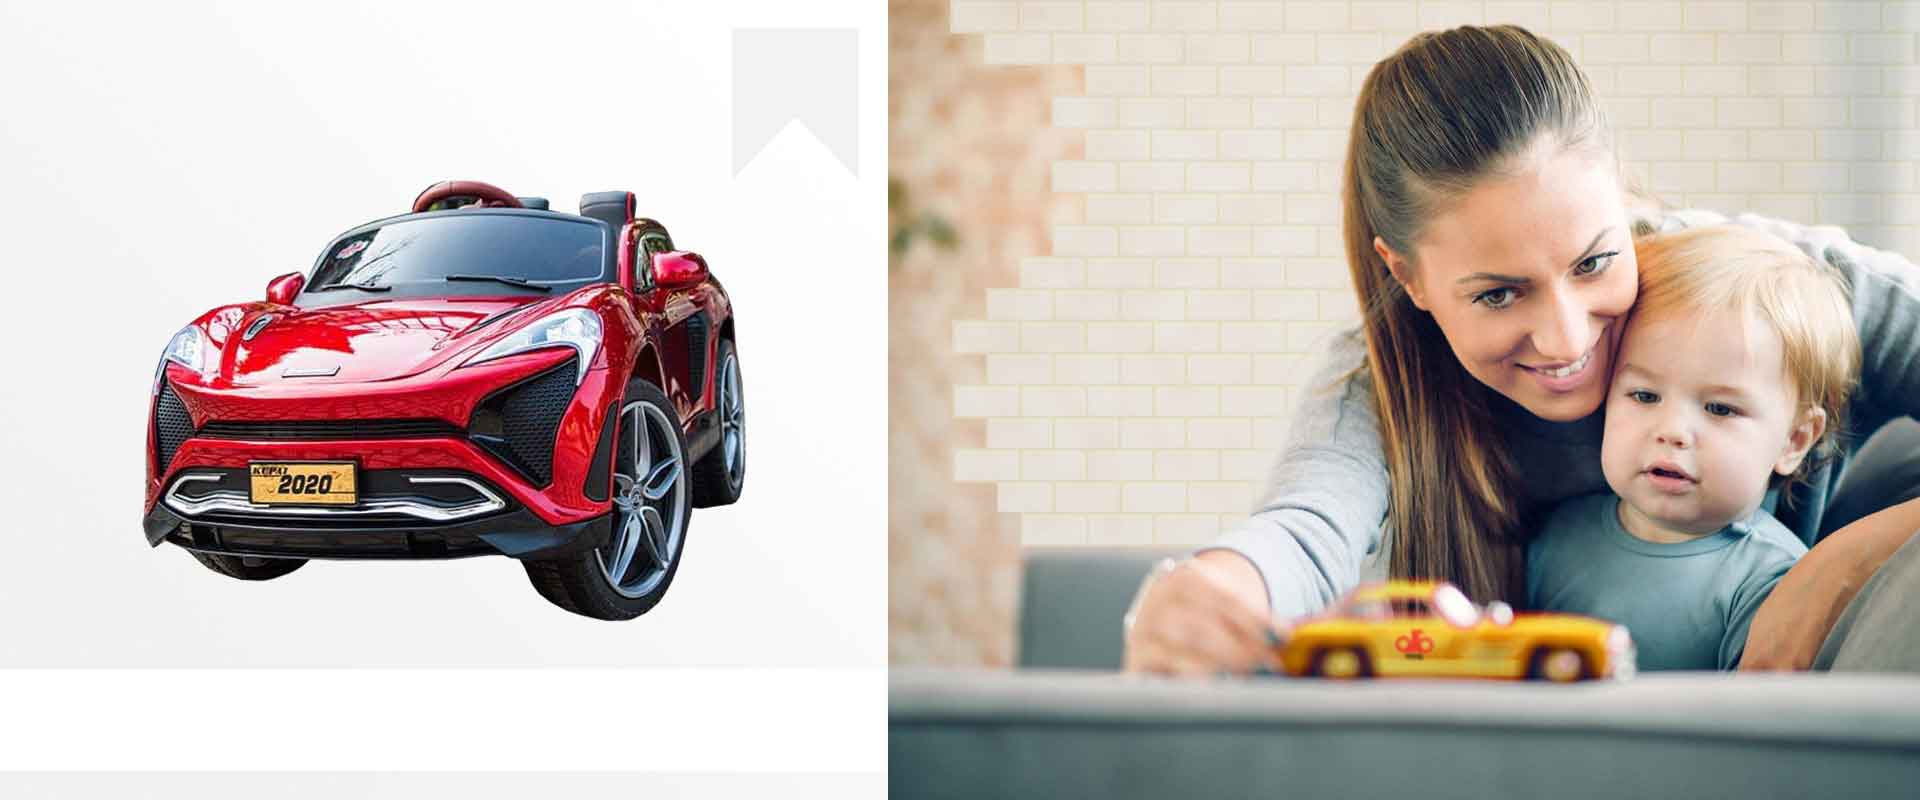 toy bike and car